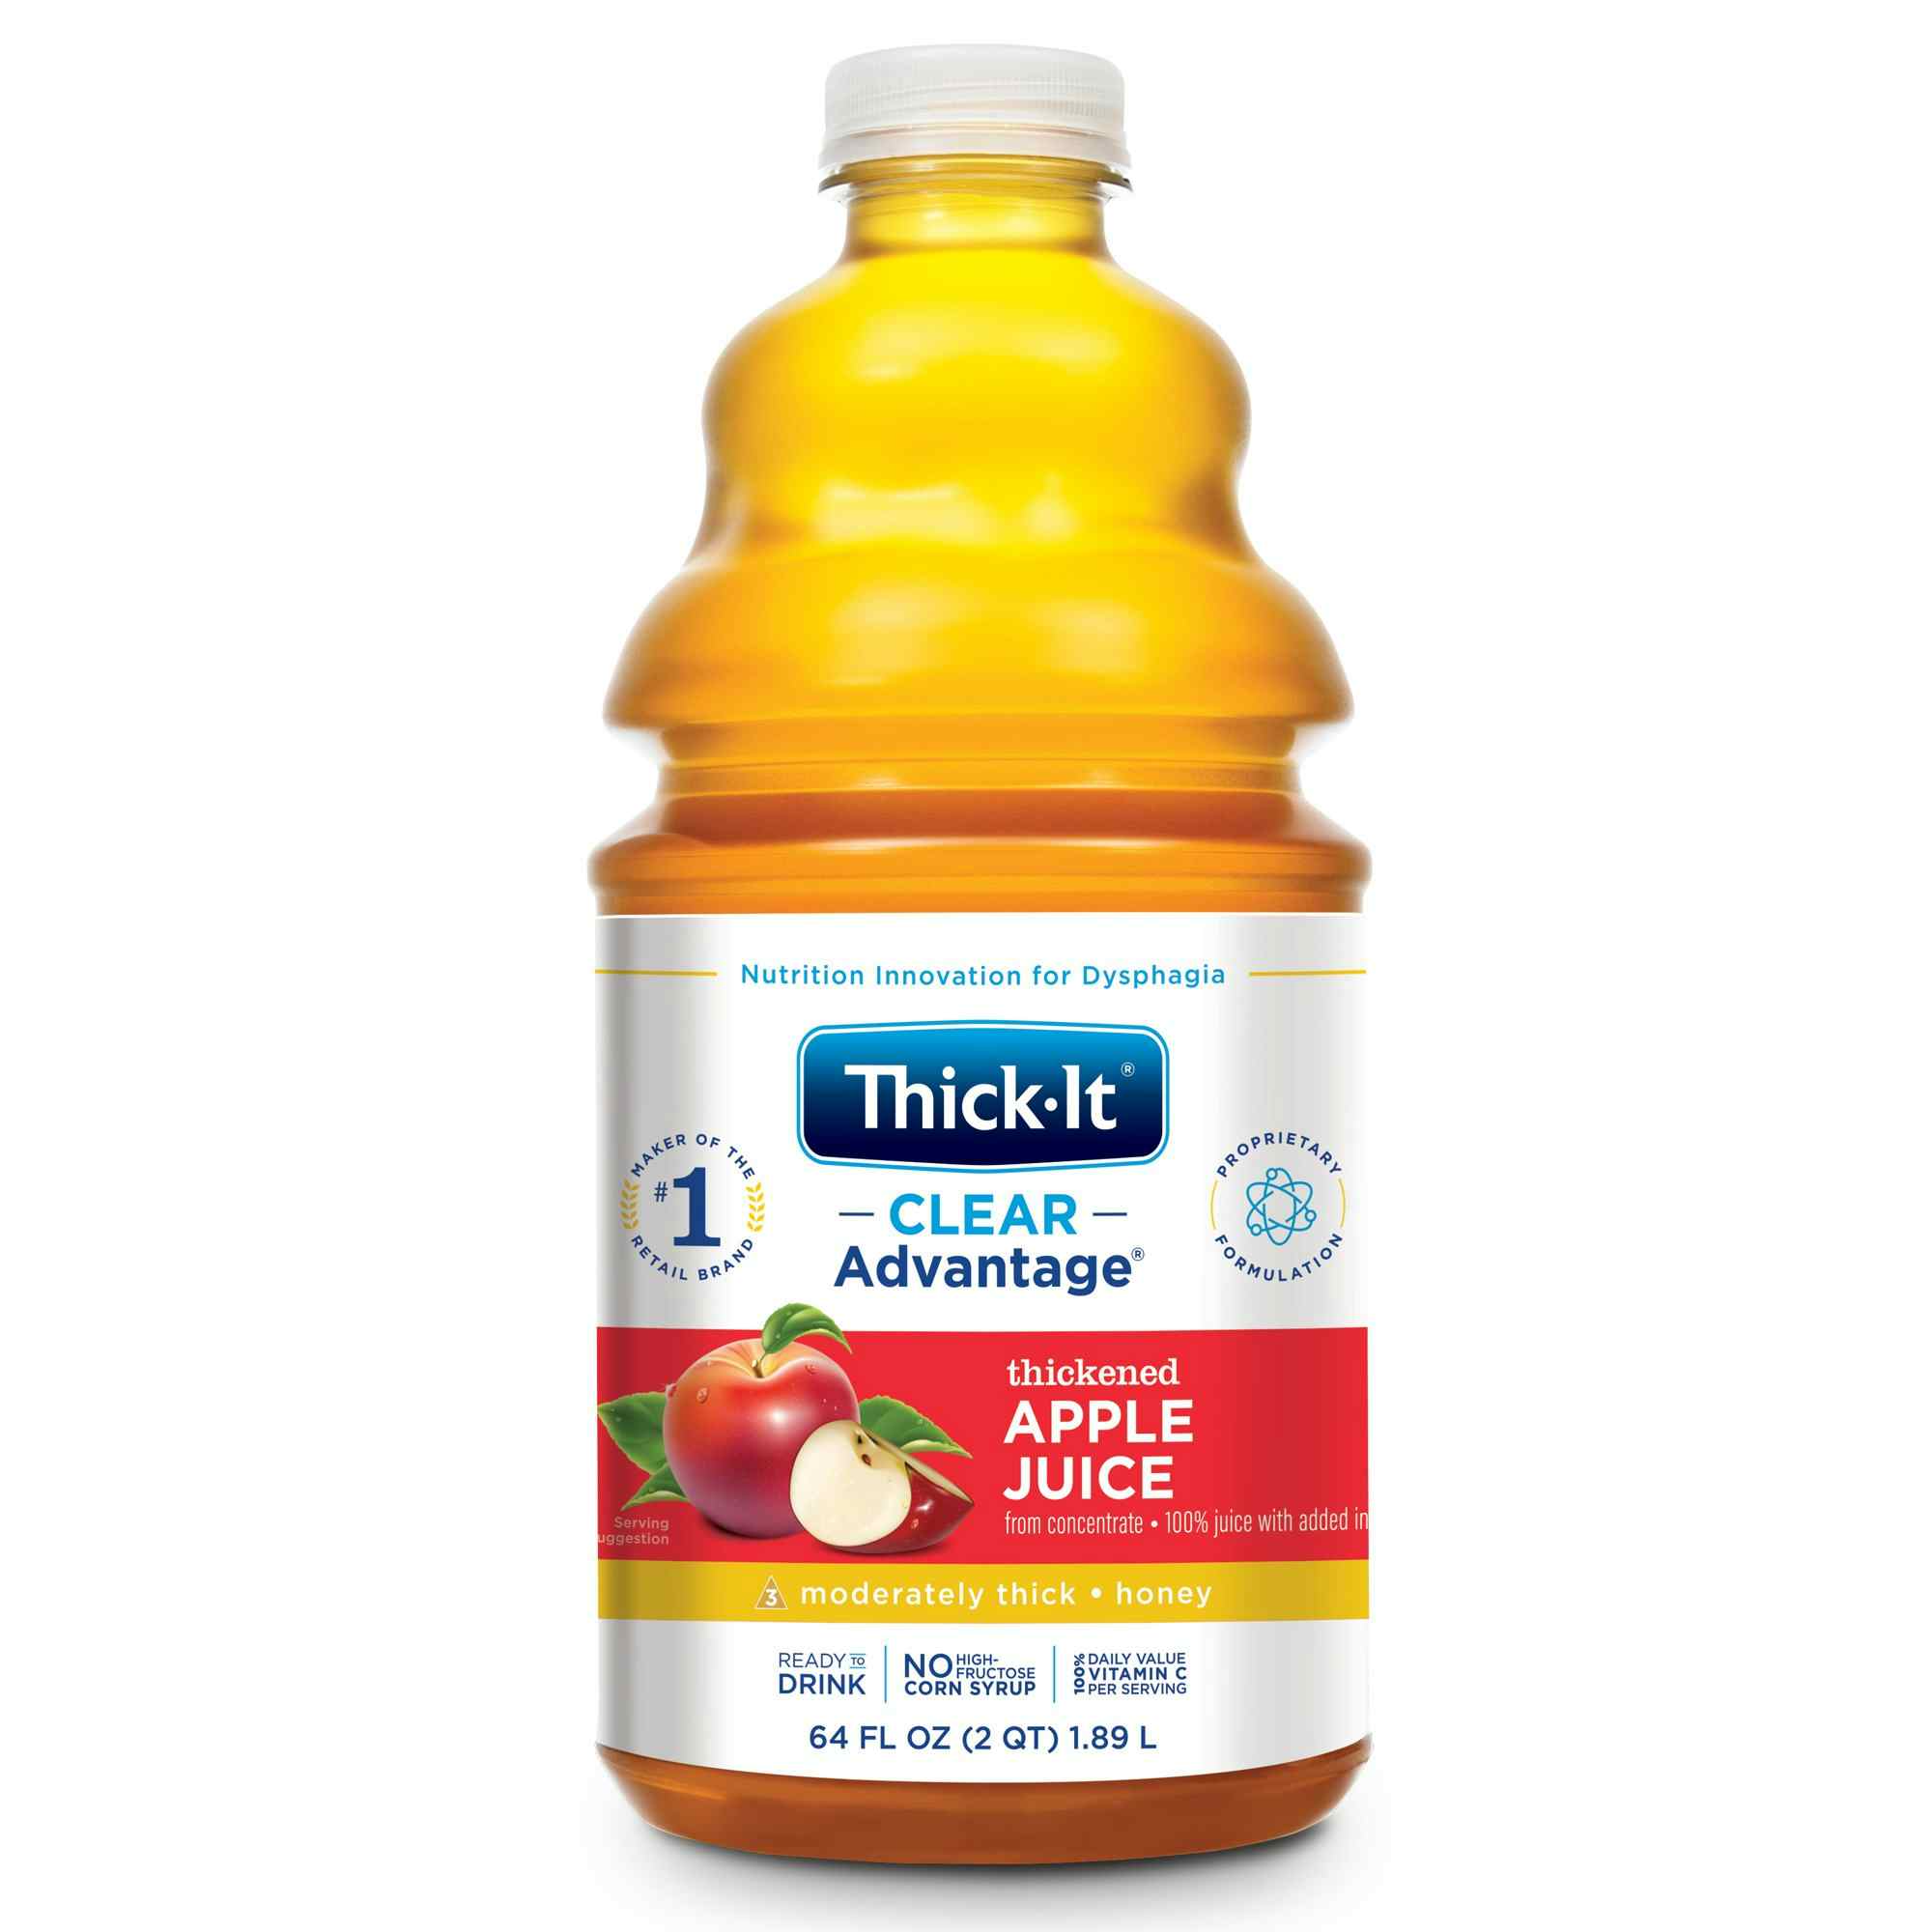 Thick-It Clear Advantage Thickened Apple Juice, Honey Consistency, 64 oz., B456-A5044, 1 Each